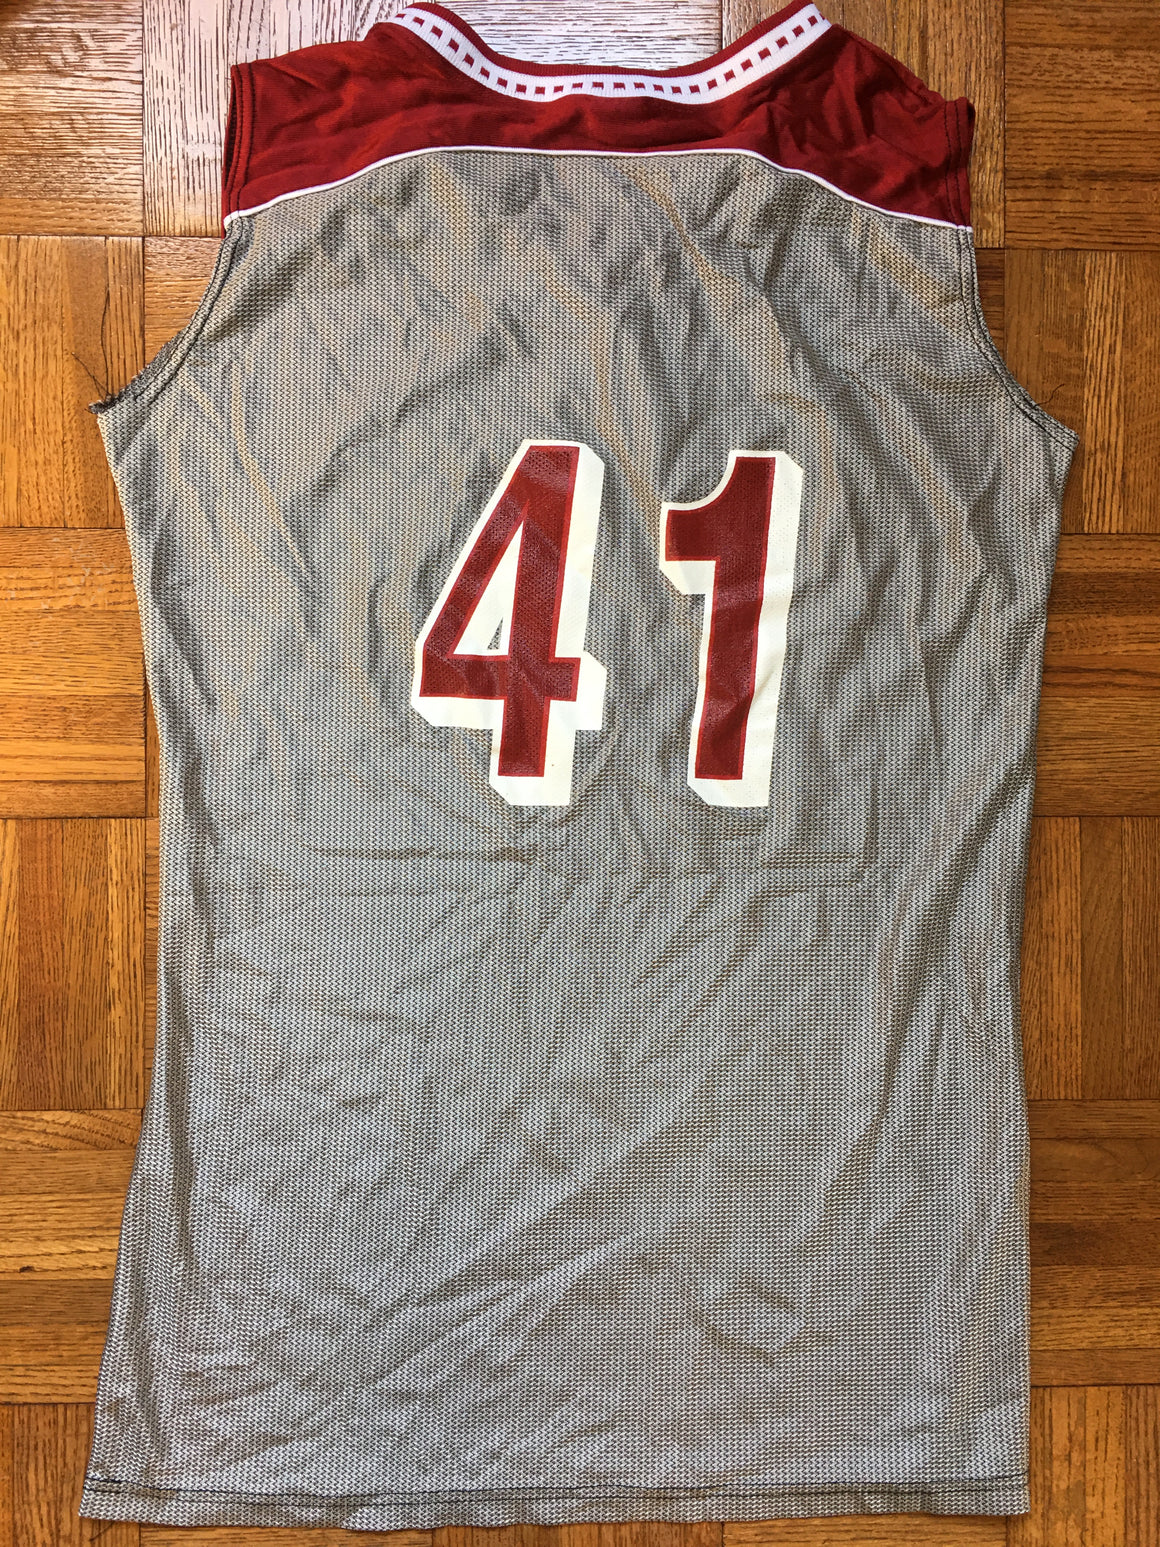 WSU Cougars authentic jersey - S / M